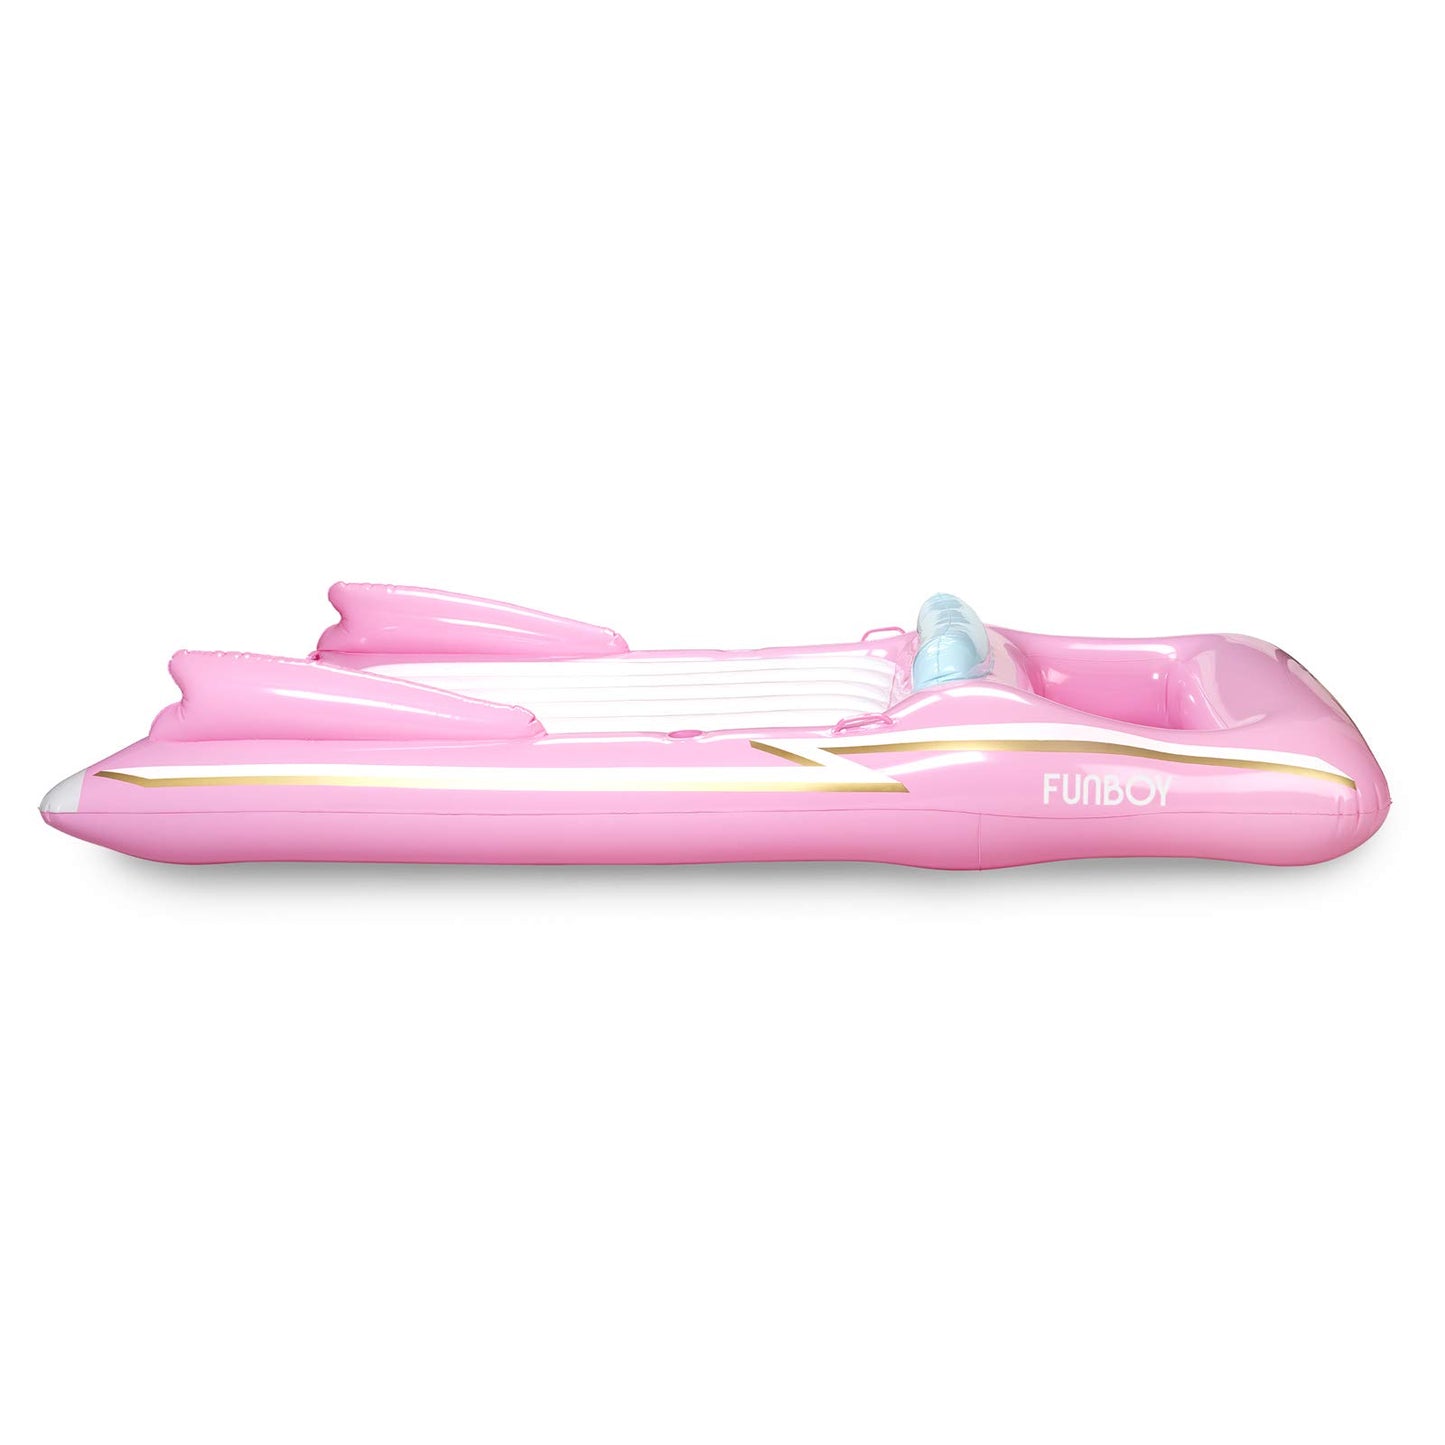 FUNBOY Giant Inflatable Luxury Pink Retro Convertible Classic Sports Car Pool Float, Two Cupholders, Luxury Float for Summer Pool Parties and Entertainment